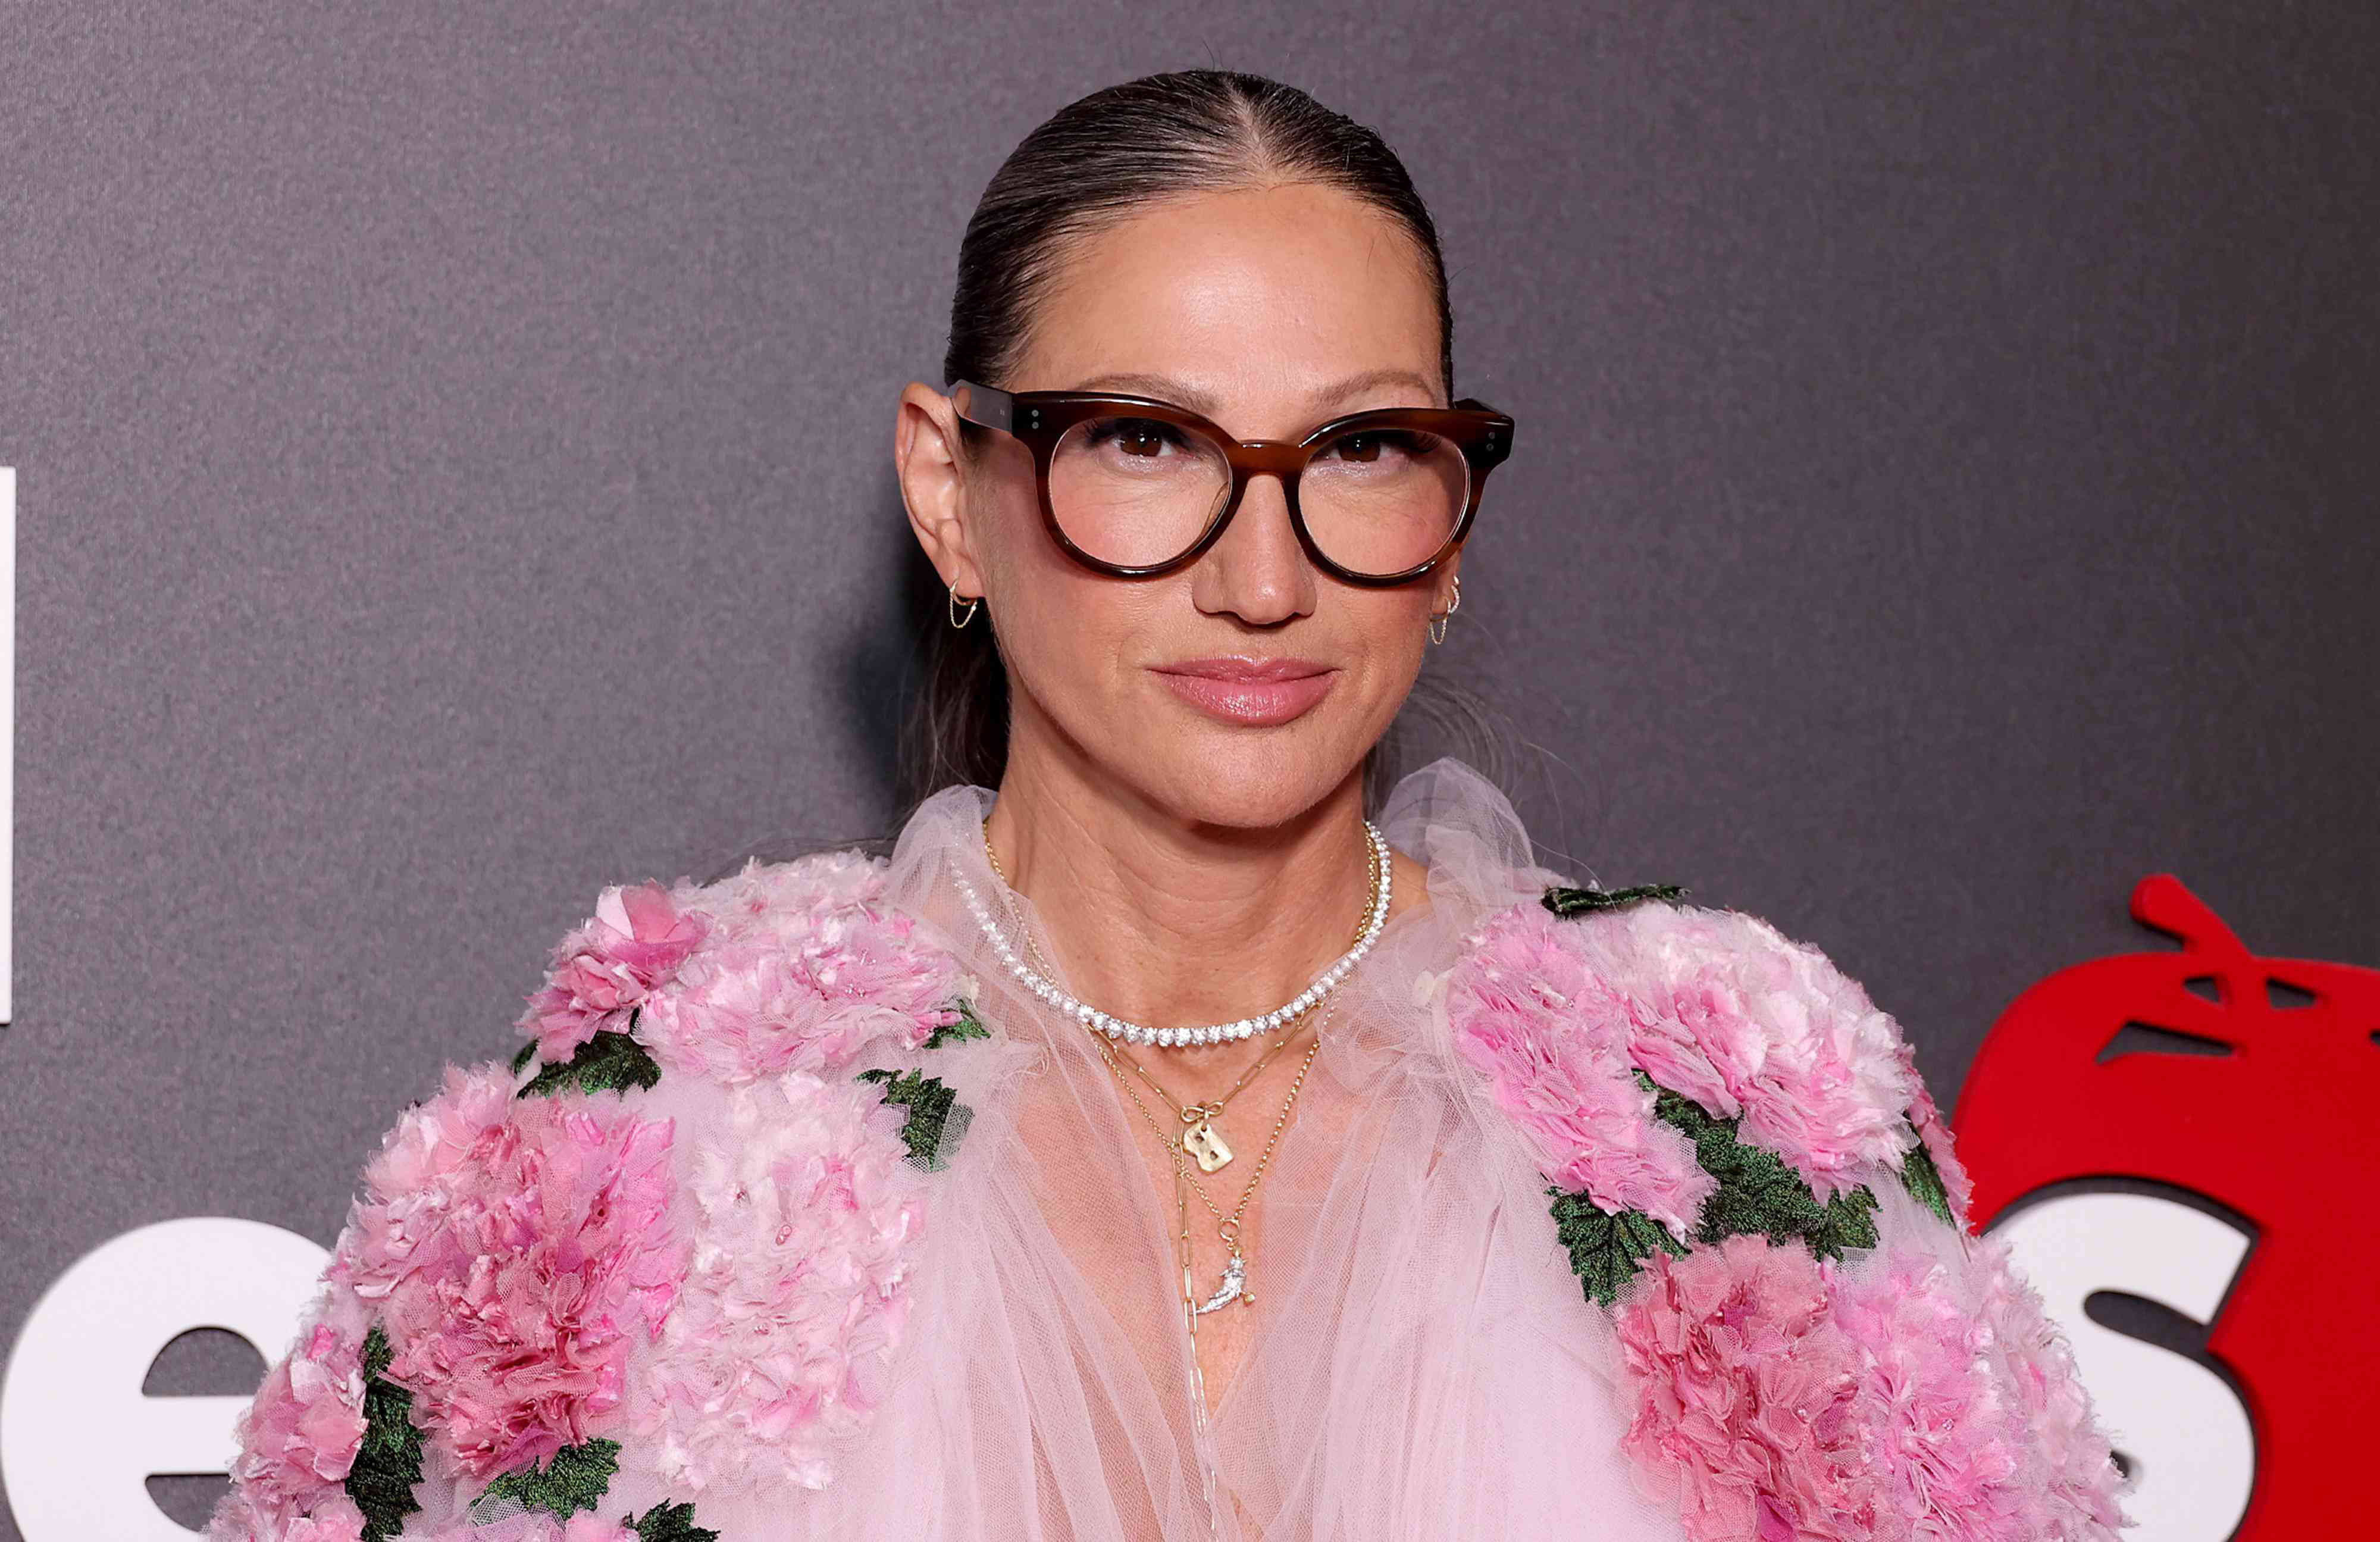 Who Is New RHONY Jenna Lyons? You Know Her Better Than You Think